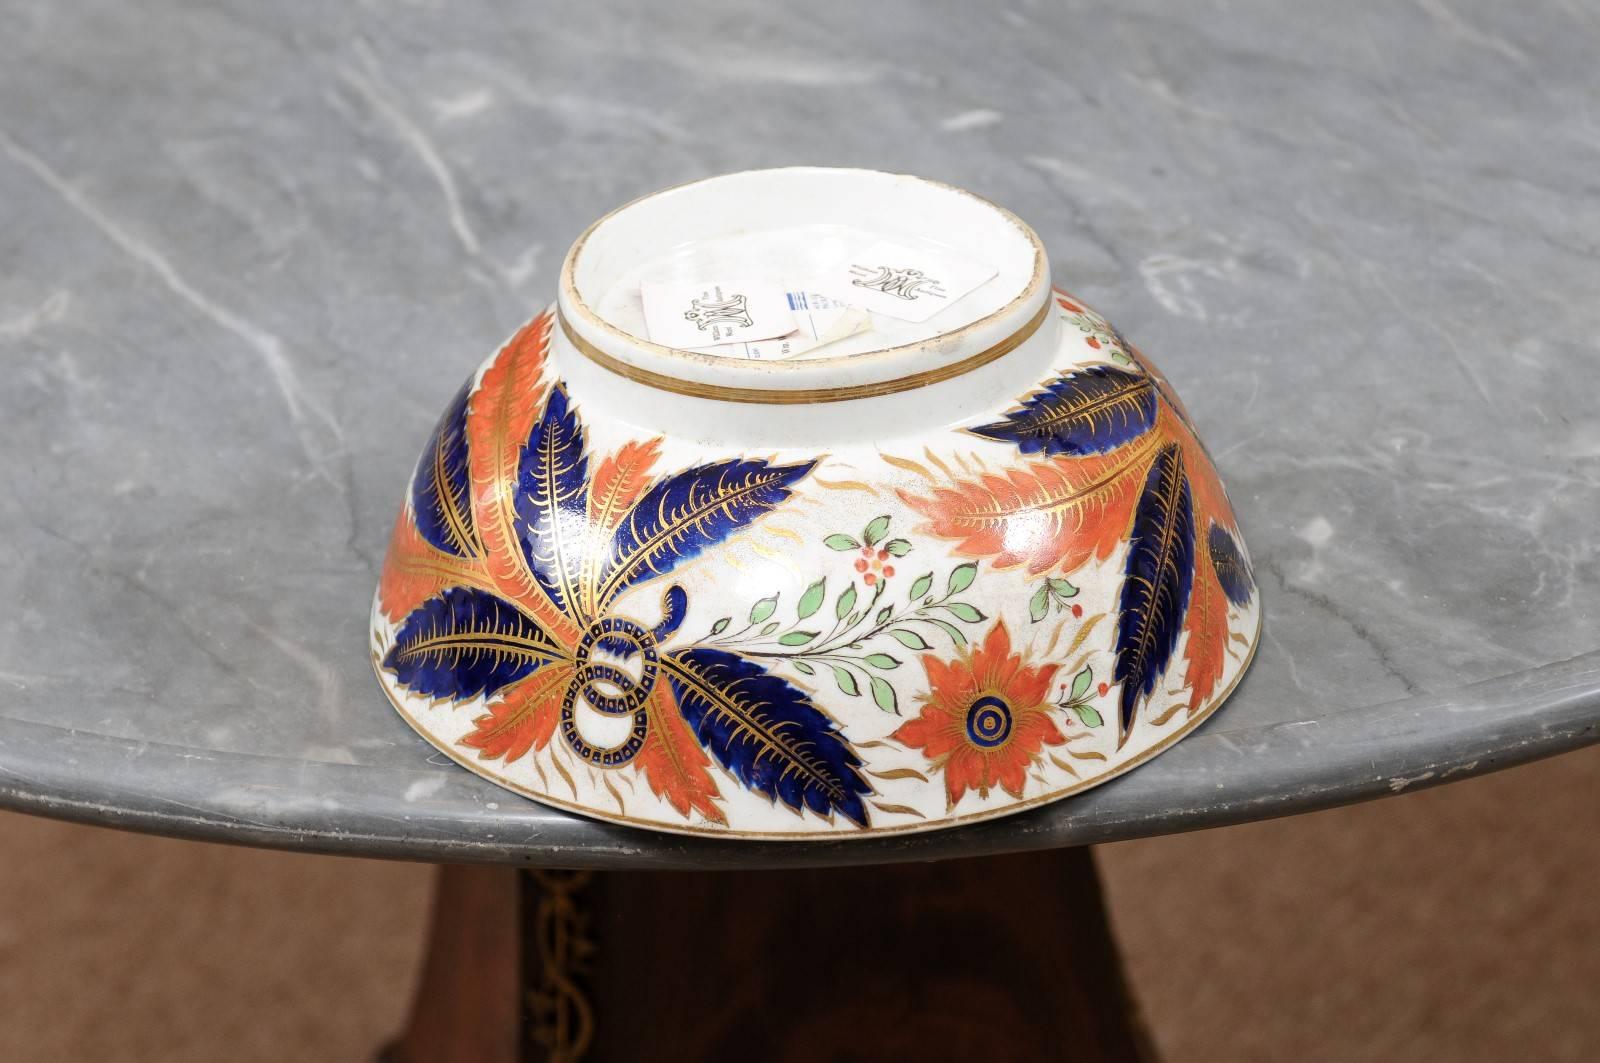 Spode “Tabacco Leaf” Punch Bowl after Chinese Export Design, England, ca. 1820 For Sale 2